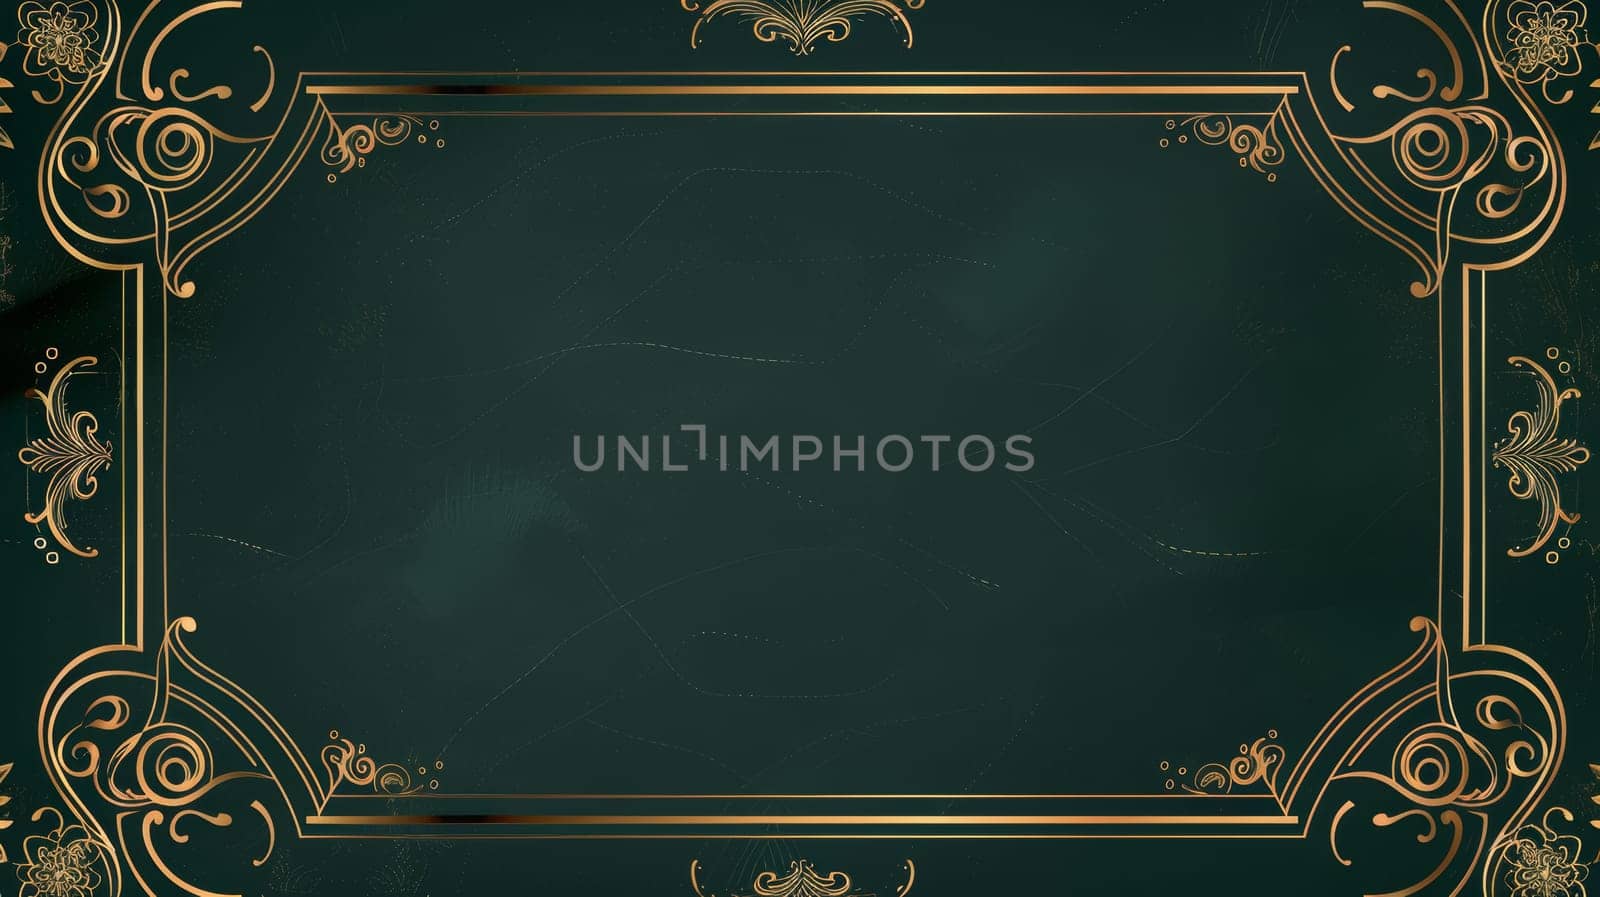 Elegant art nouveau classic antique design, gold lines gradient, frames on dark green background. Luxury illustration for gala, grand opening, or an art deco event.